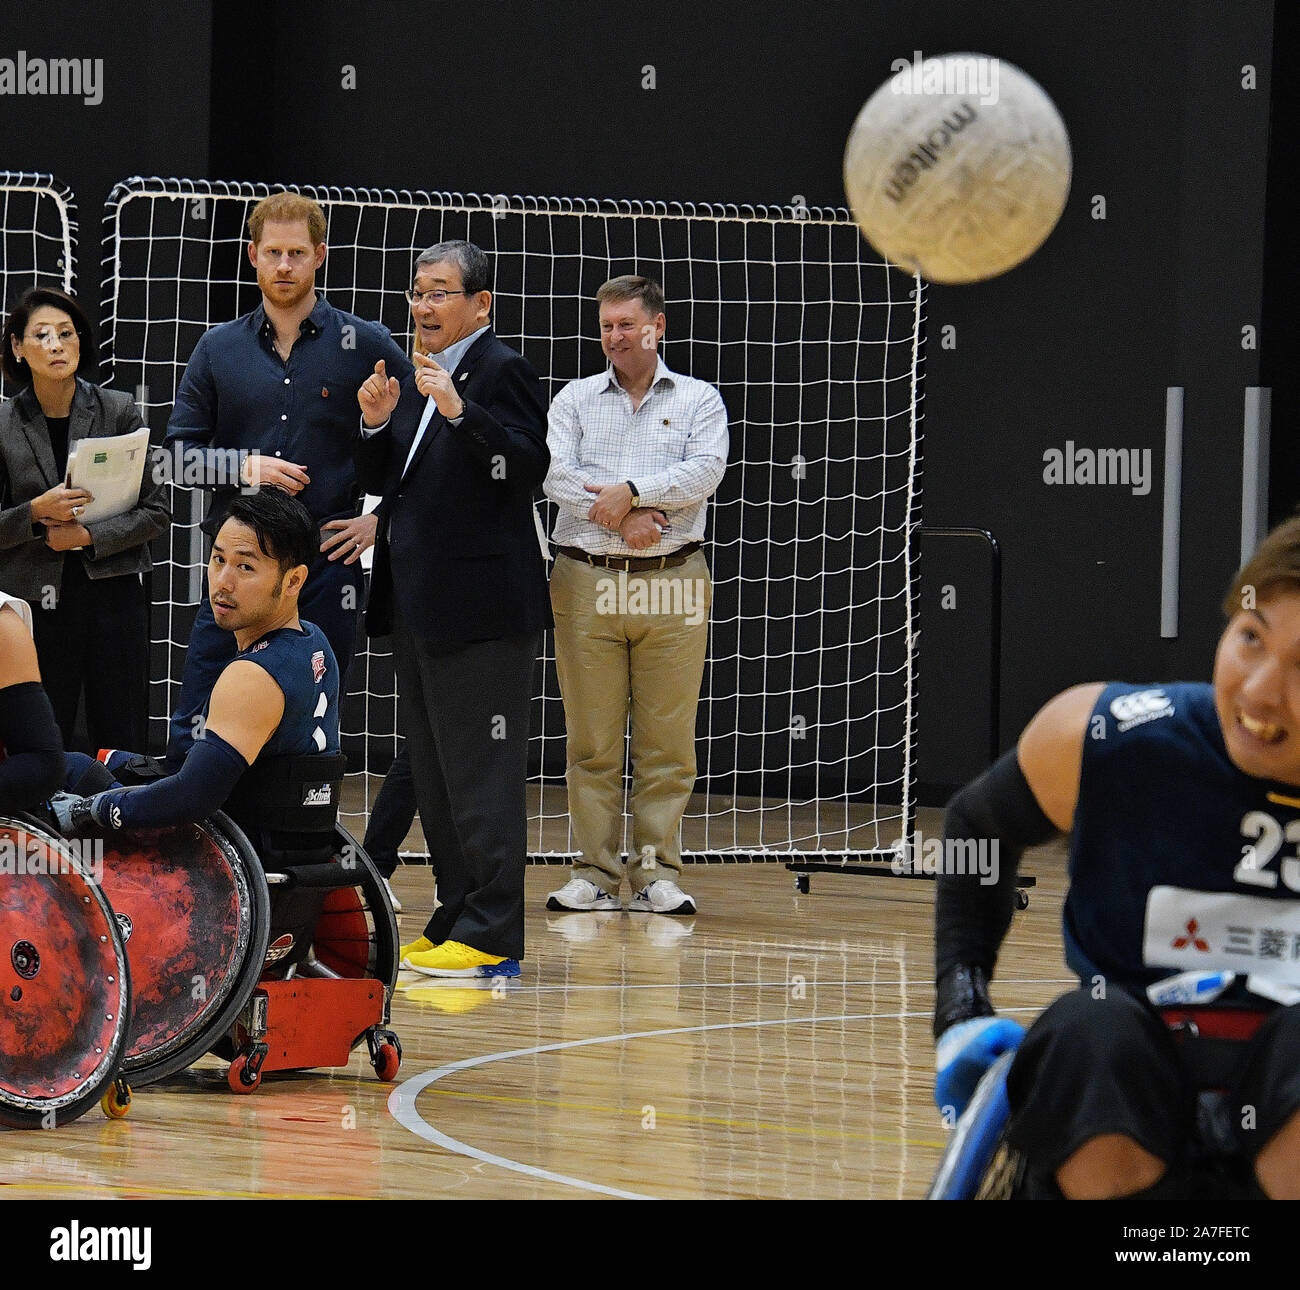 Tokyo, Japan. 02nd Nov, 2019. Prince Harry, HRH Duke of Sussex watches the wheel-chair rugby training session at the Para Arena in Tokyo, Japan on Saturday, November 2, 2019. On a trip to the Warrior Games in the USA in 2013, HRH The Duke of Sussex saw first-hand how the power of sport can help physically, psychologically and socially those suffering from injuries and illness. He was inspired by his visit and created the 'Invictus Games Foundation' use power of sport to inspire recovery, support rehabilitation on 2014. Credit: UPI/Alamy Live News Stock Photo